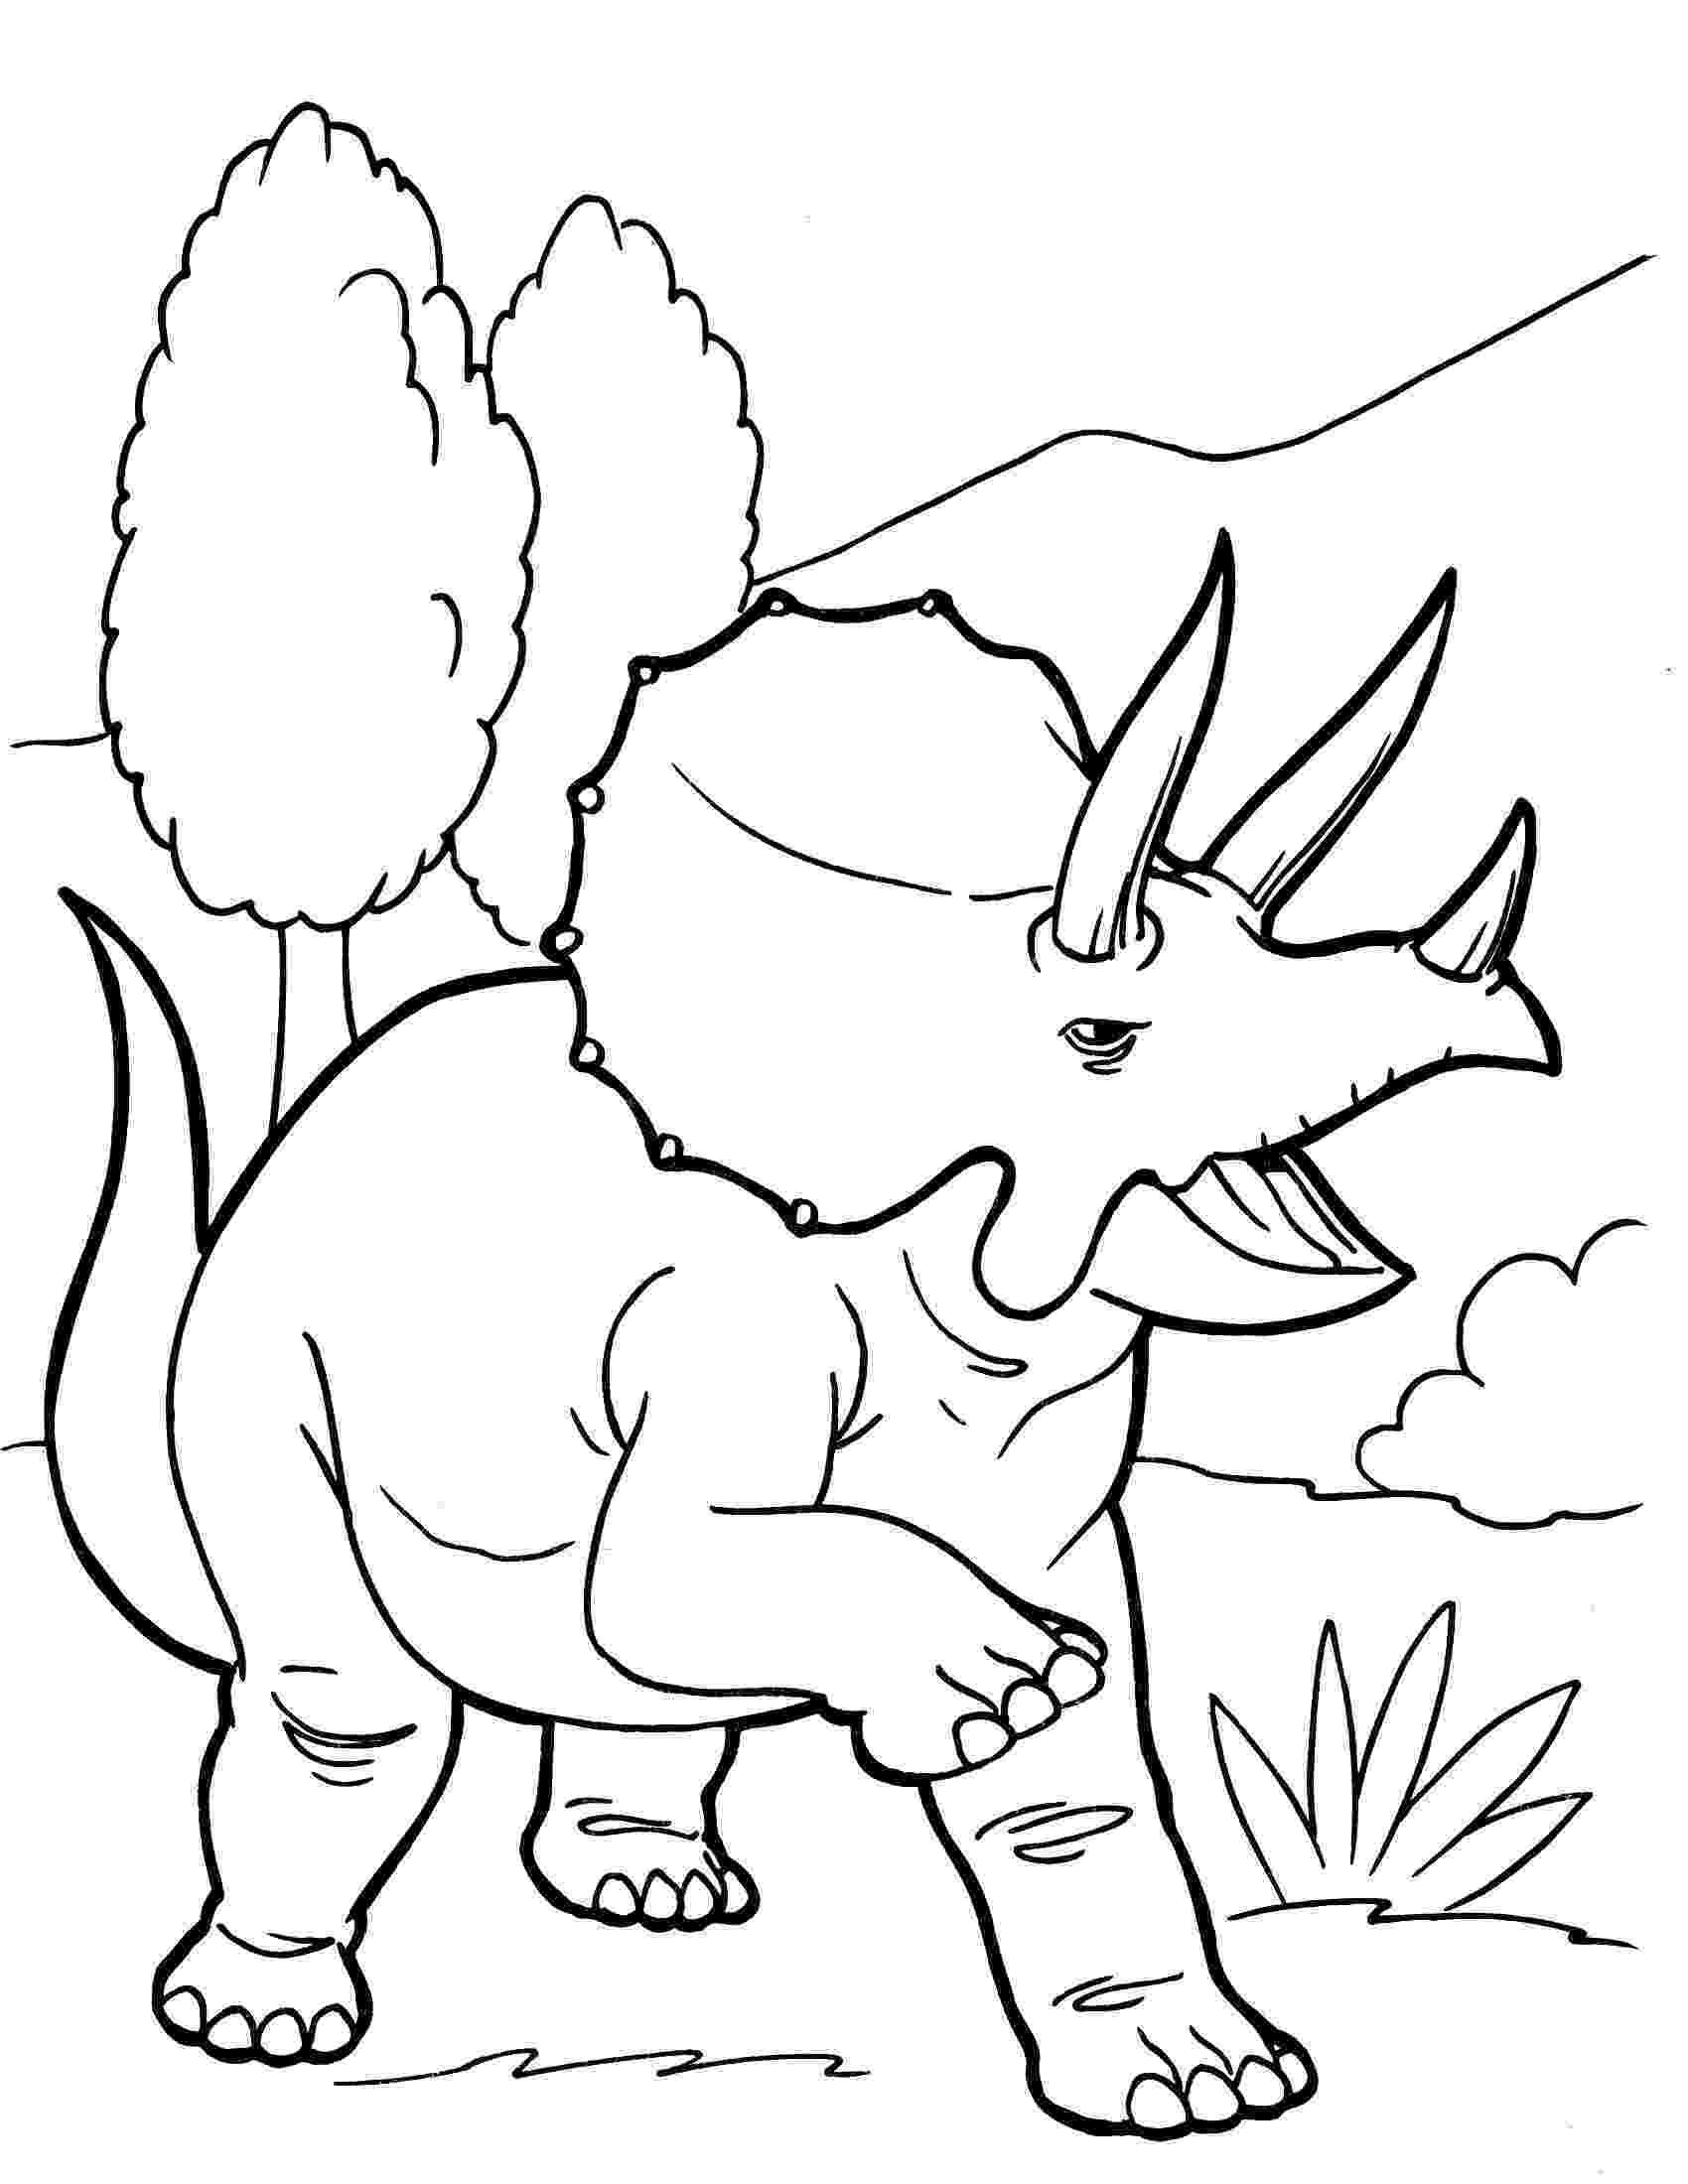 printable pictures to paint for kids dinosaur paintings for kids description from dinosaur pictures paint printable kids for to 